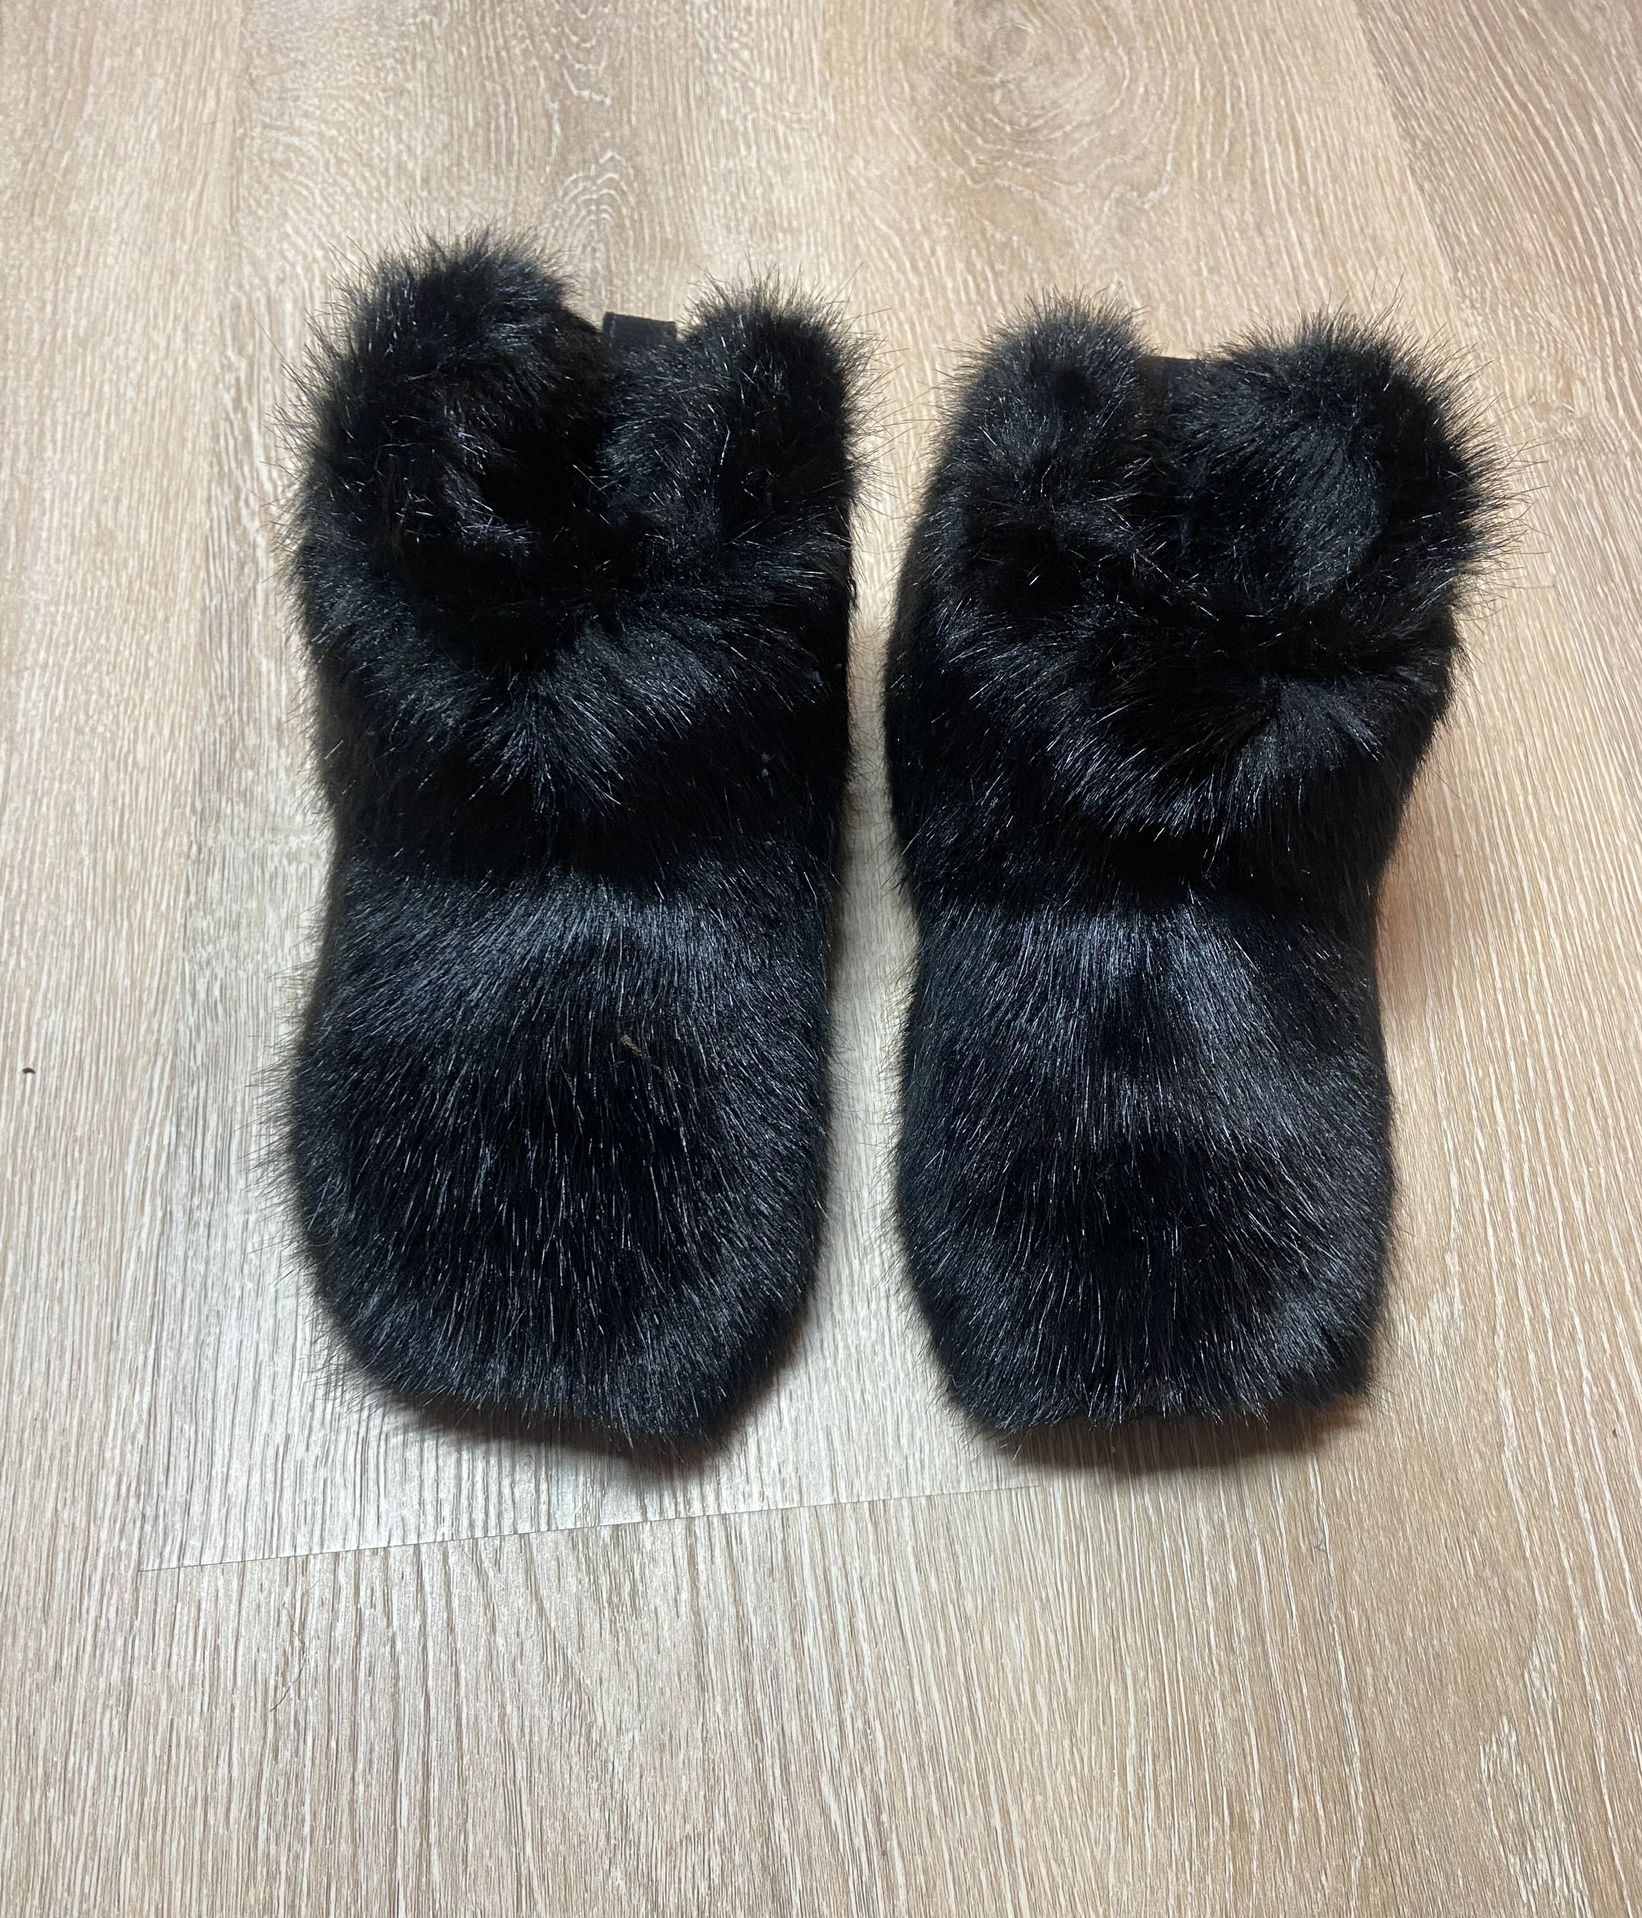 Ugg Boots/Slippers